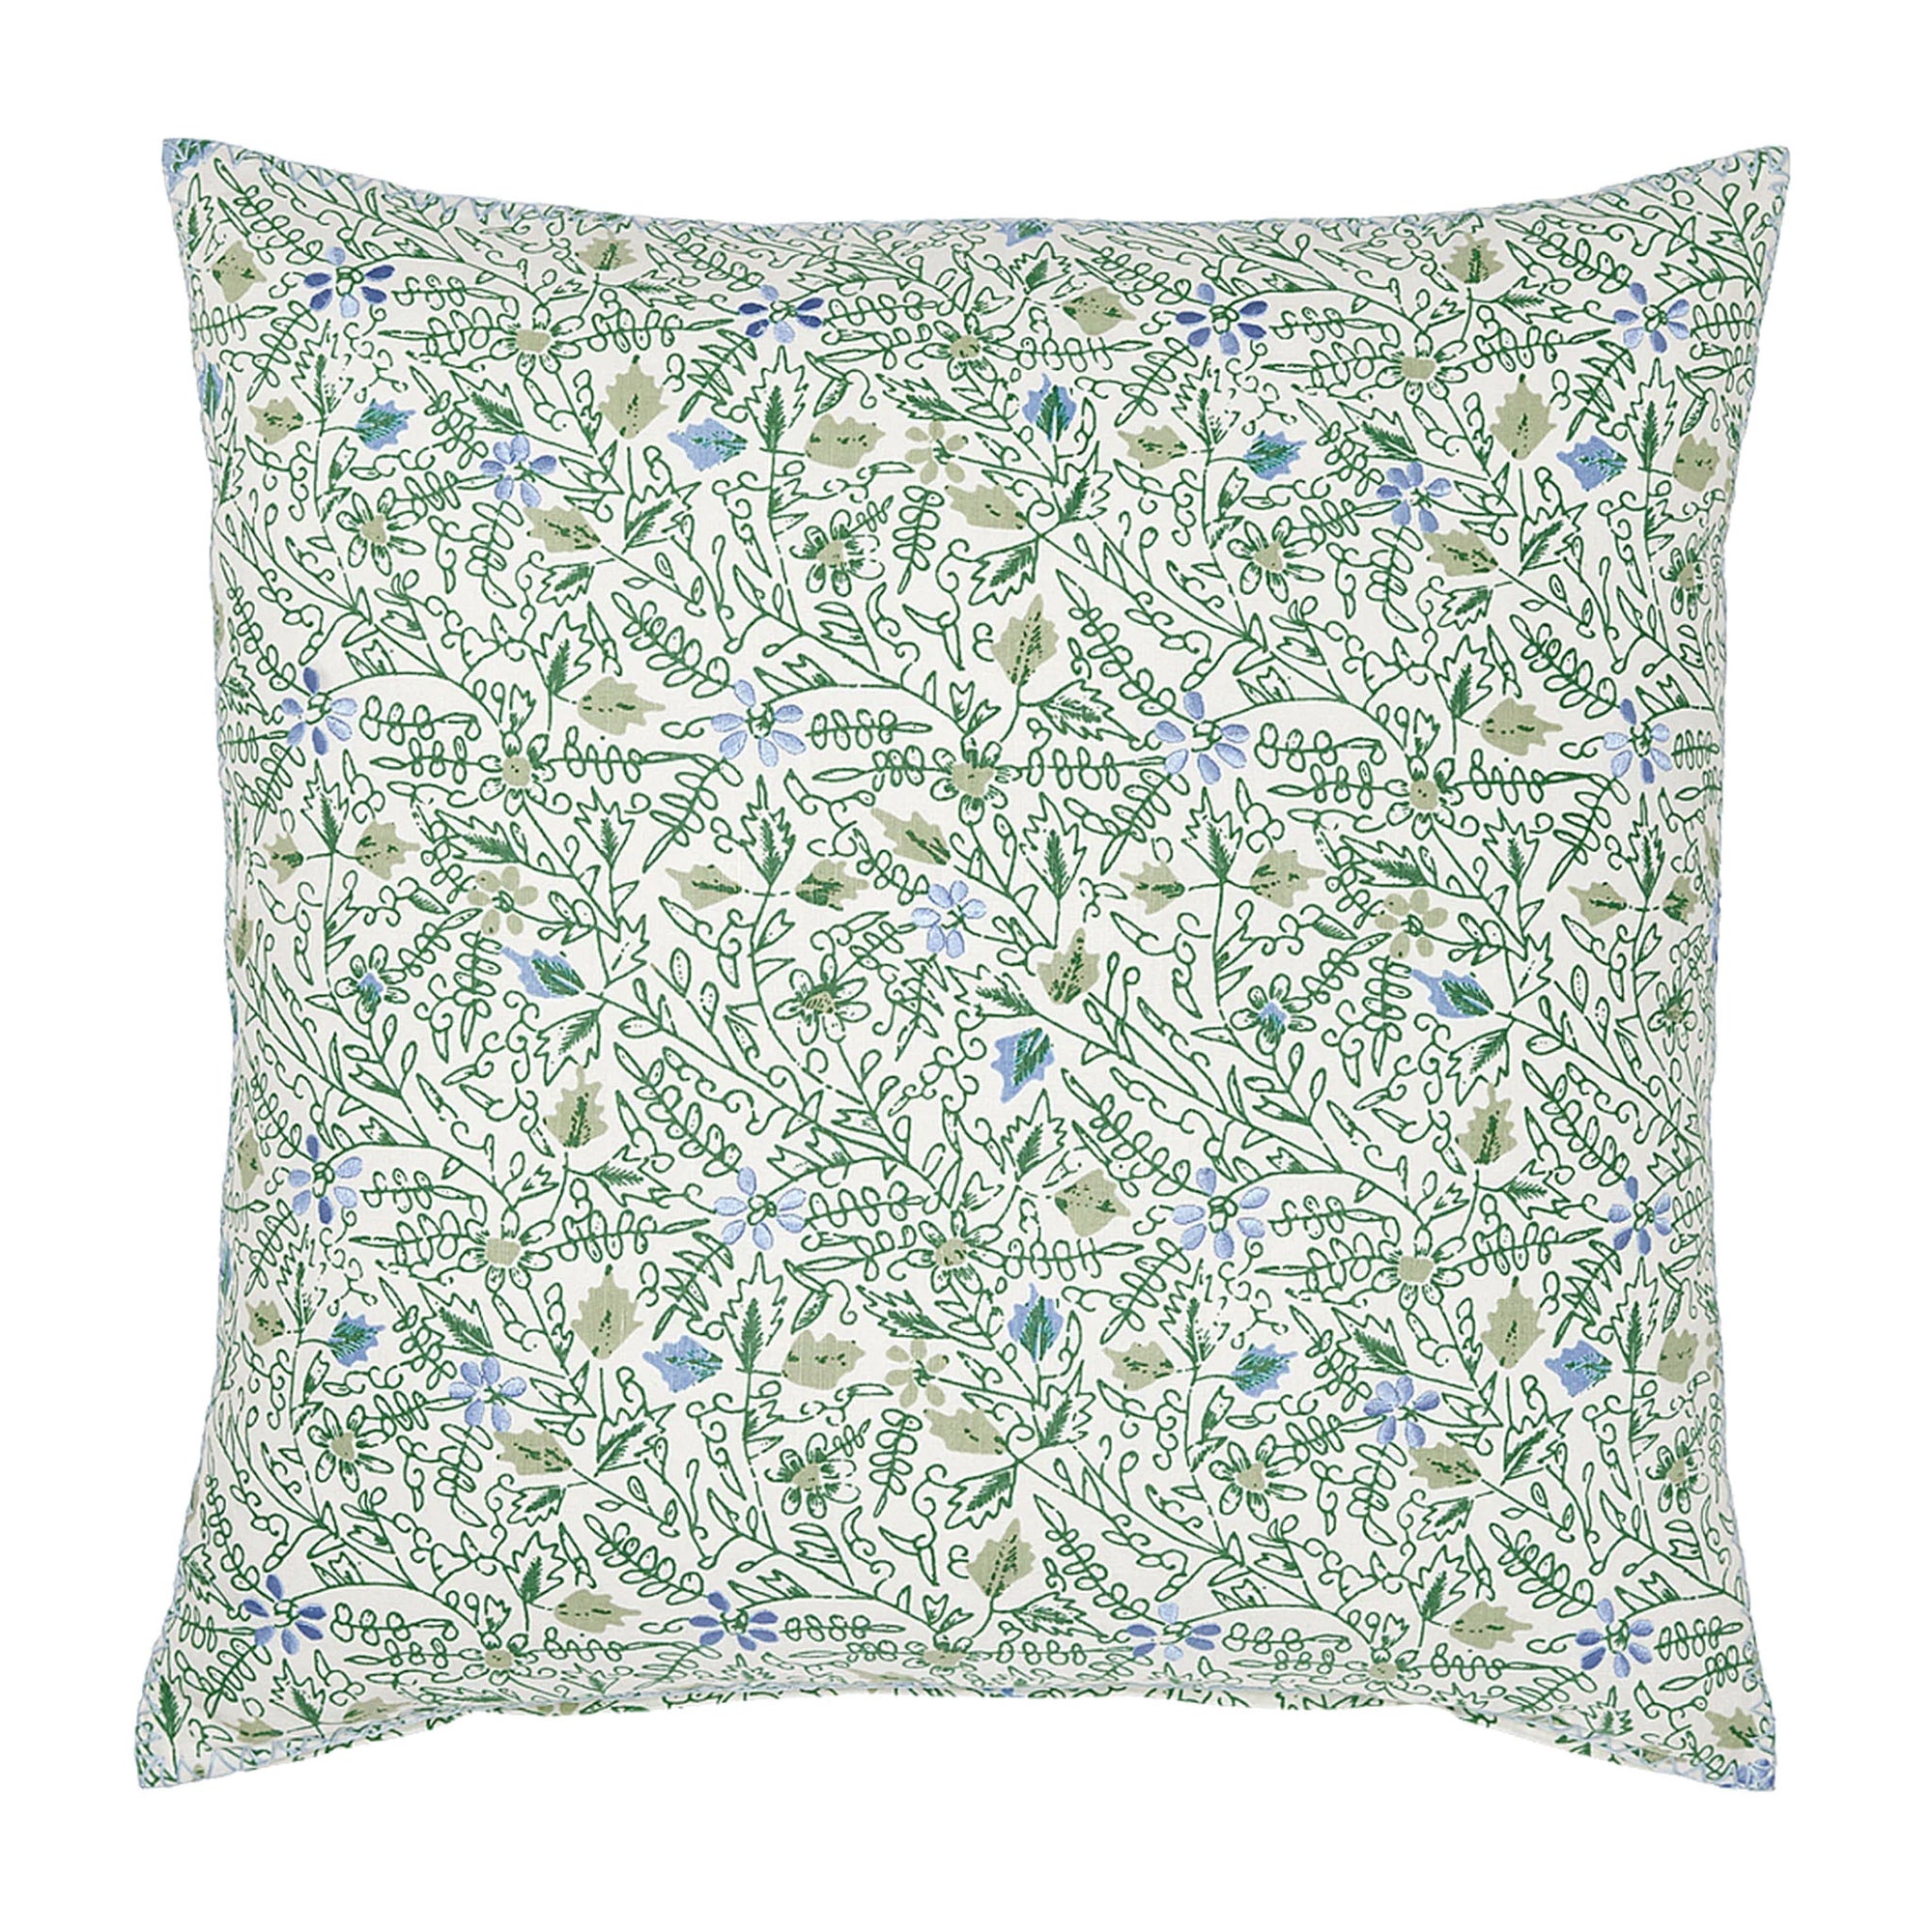 Charit Pillow Cover